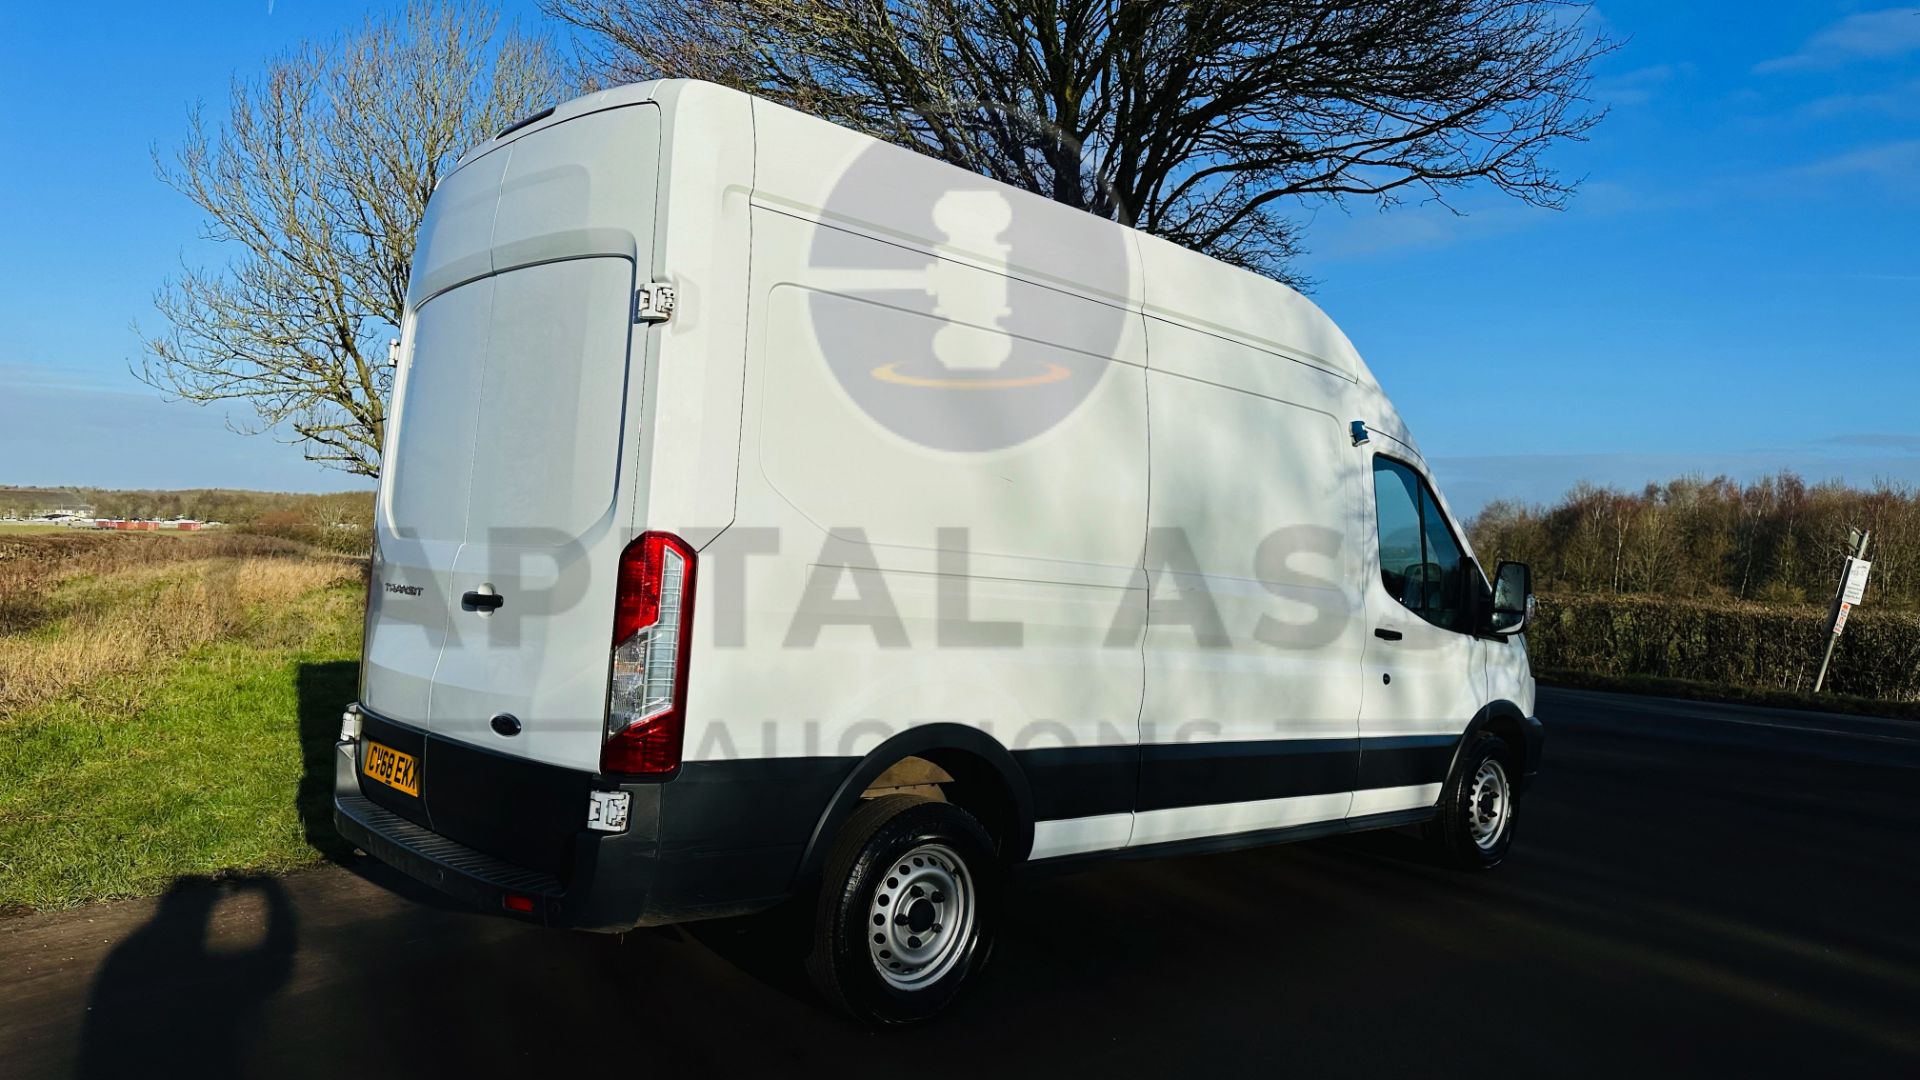 (On Sale) FORD TRANSIT 130 T350 *LWB -REFRIGERATED VAN* (2019 - EURO 6) 2.0 TDCI 'ECOBLUE' - 6 SPEED - Image 12 of 43